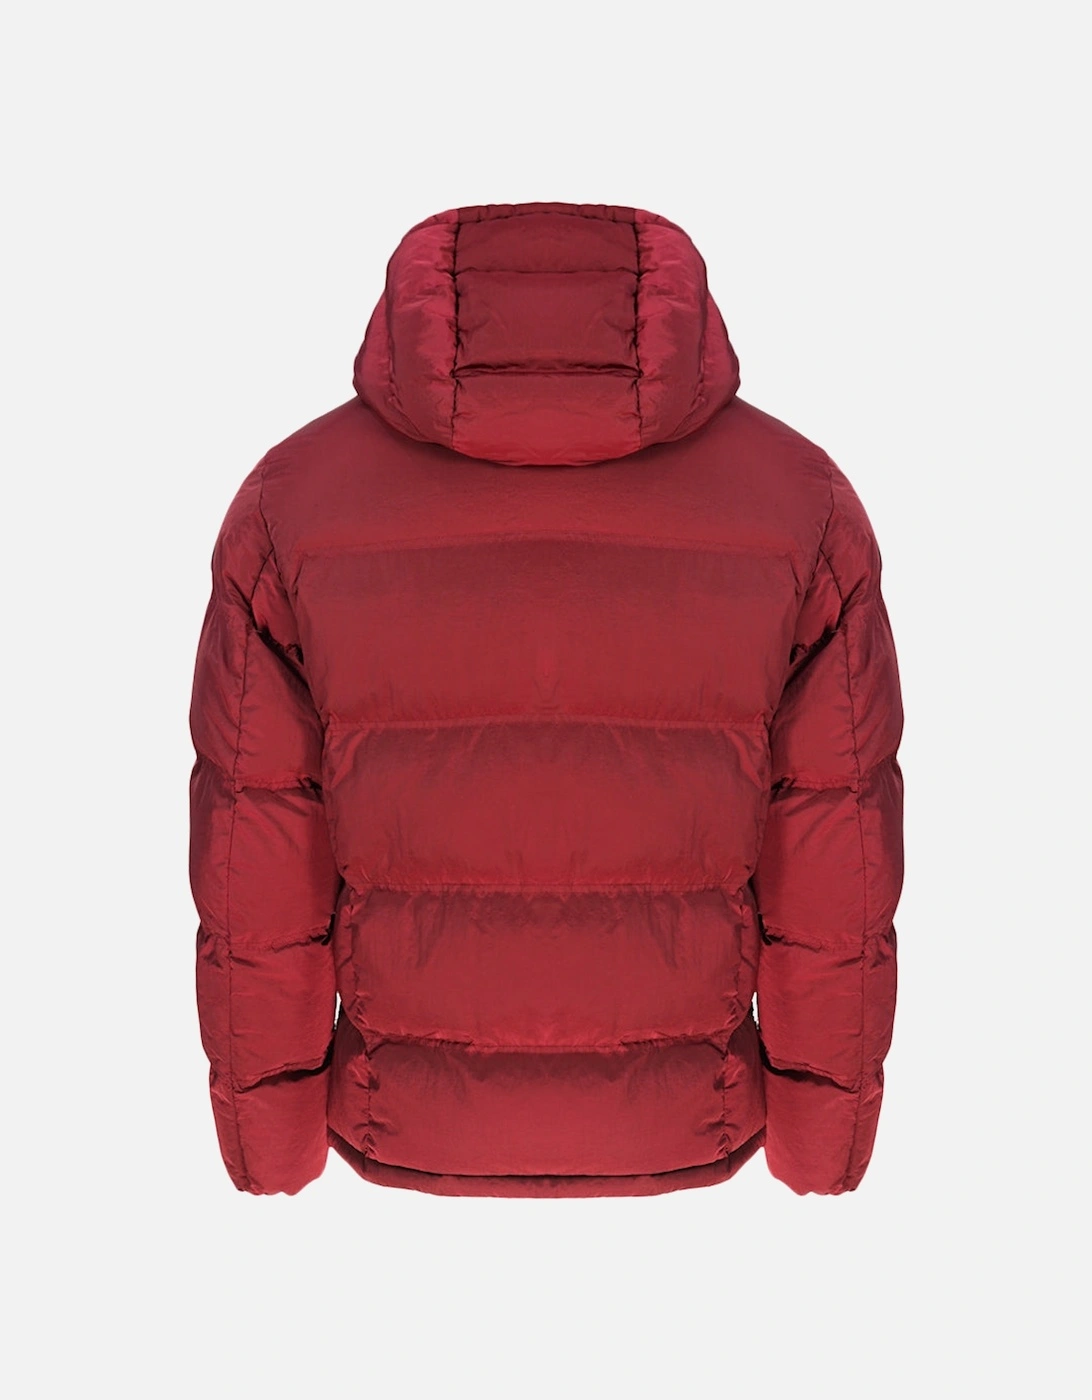 Branded Red Hooded Padded Jacket